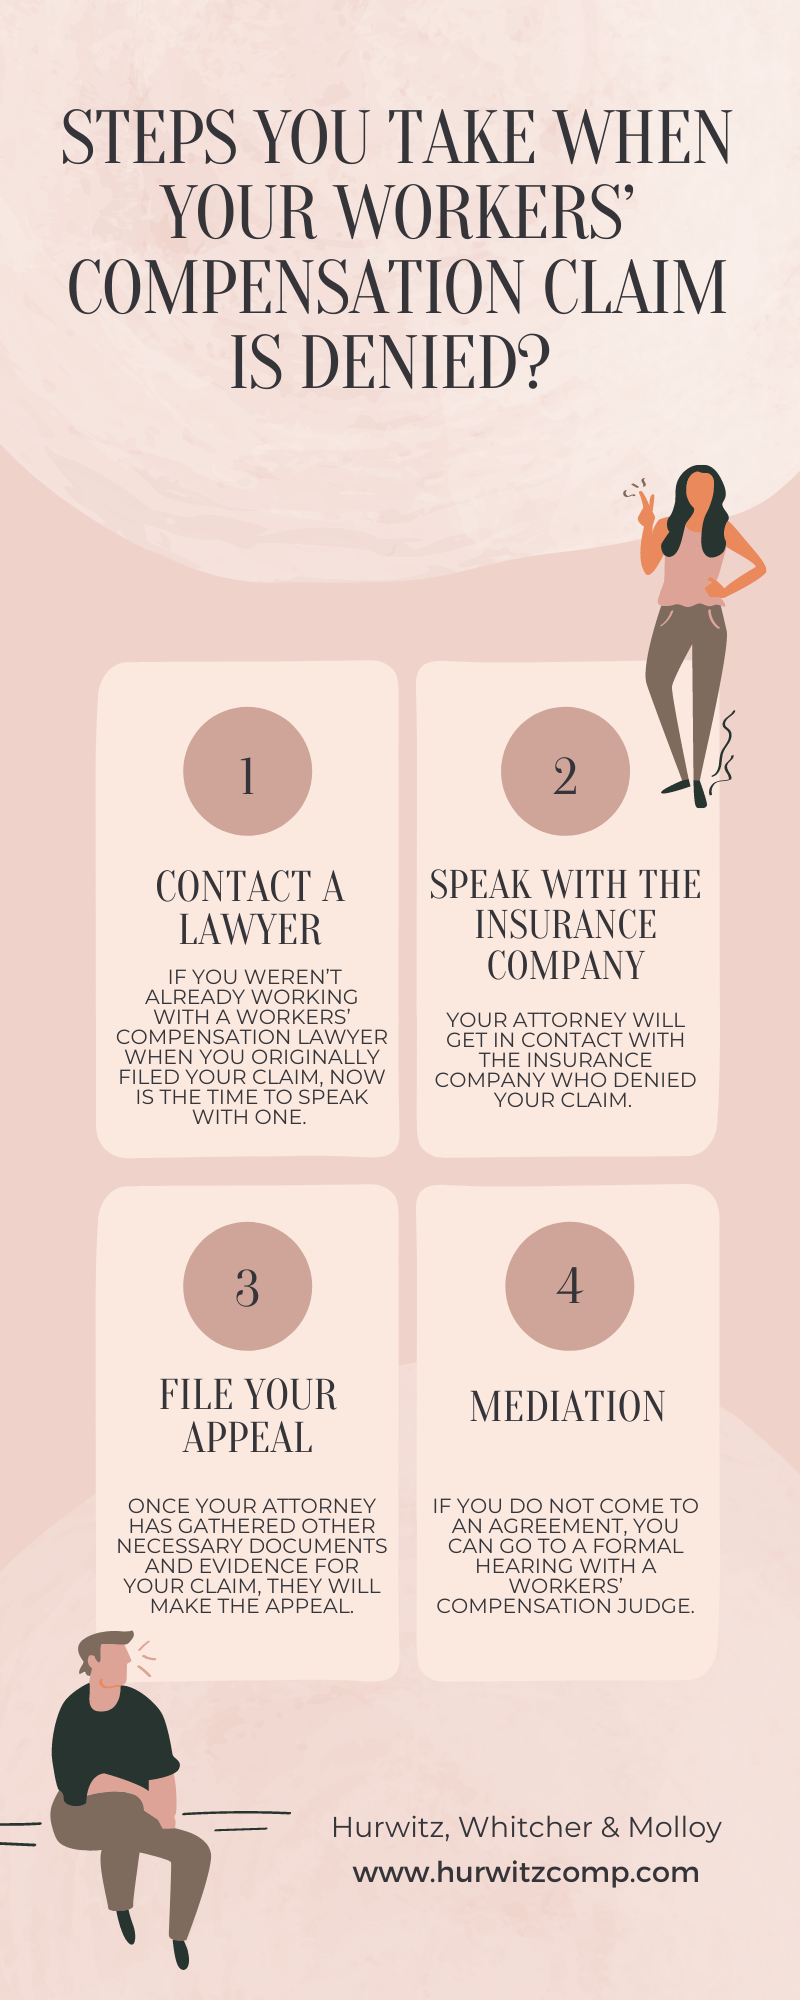 Steps you take when your workers’ compensation claim is denied Infographic